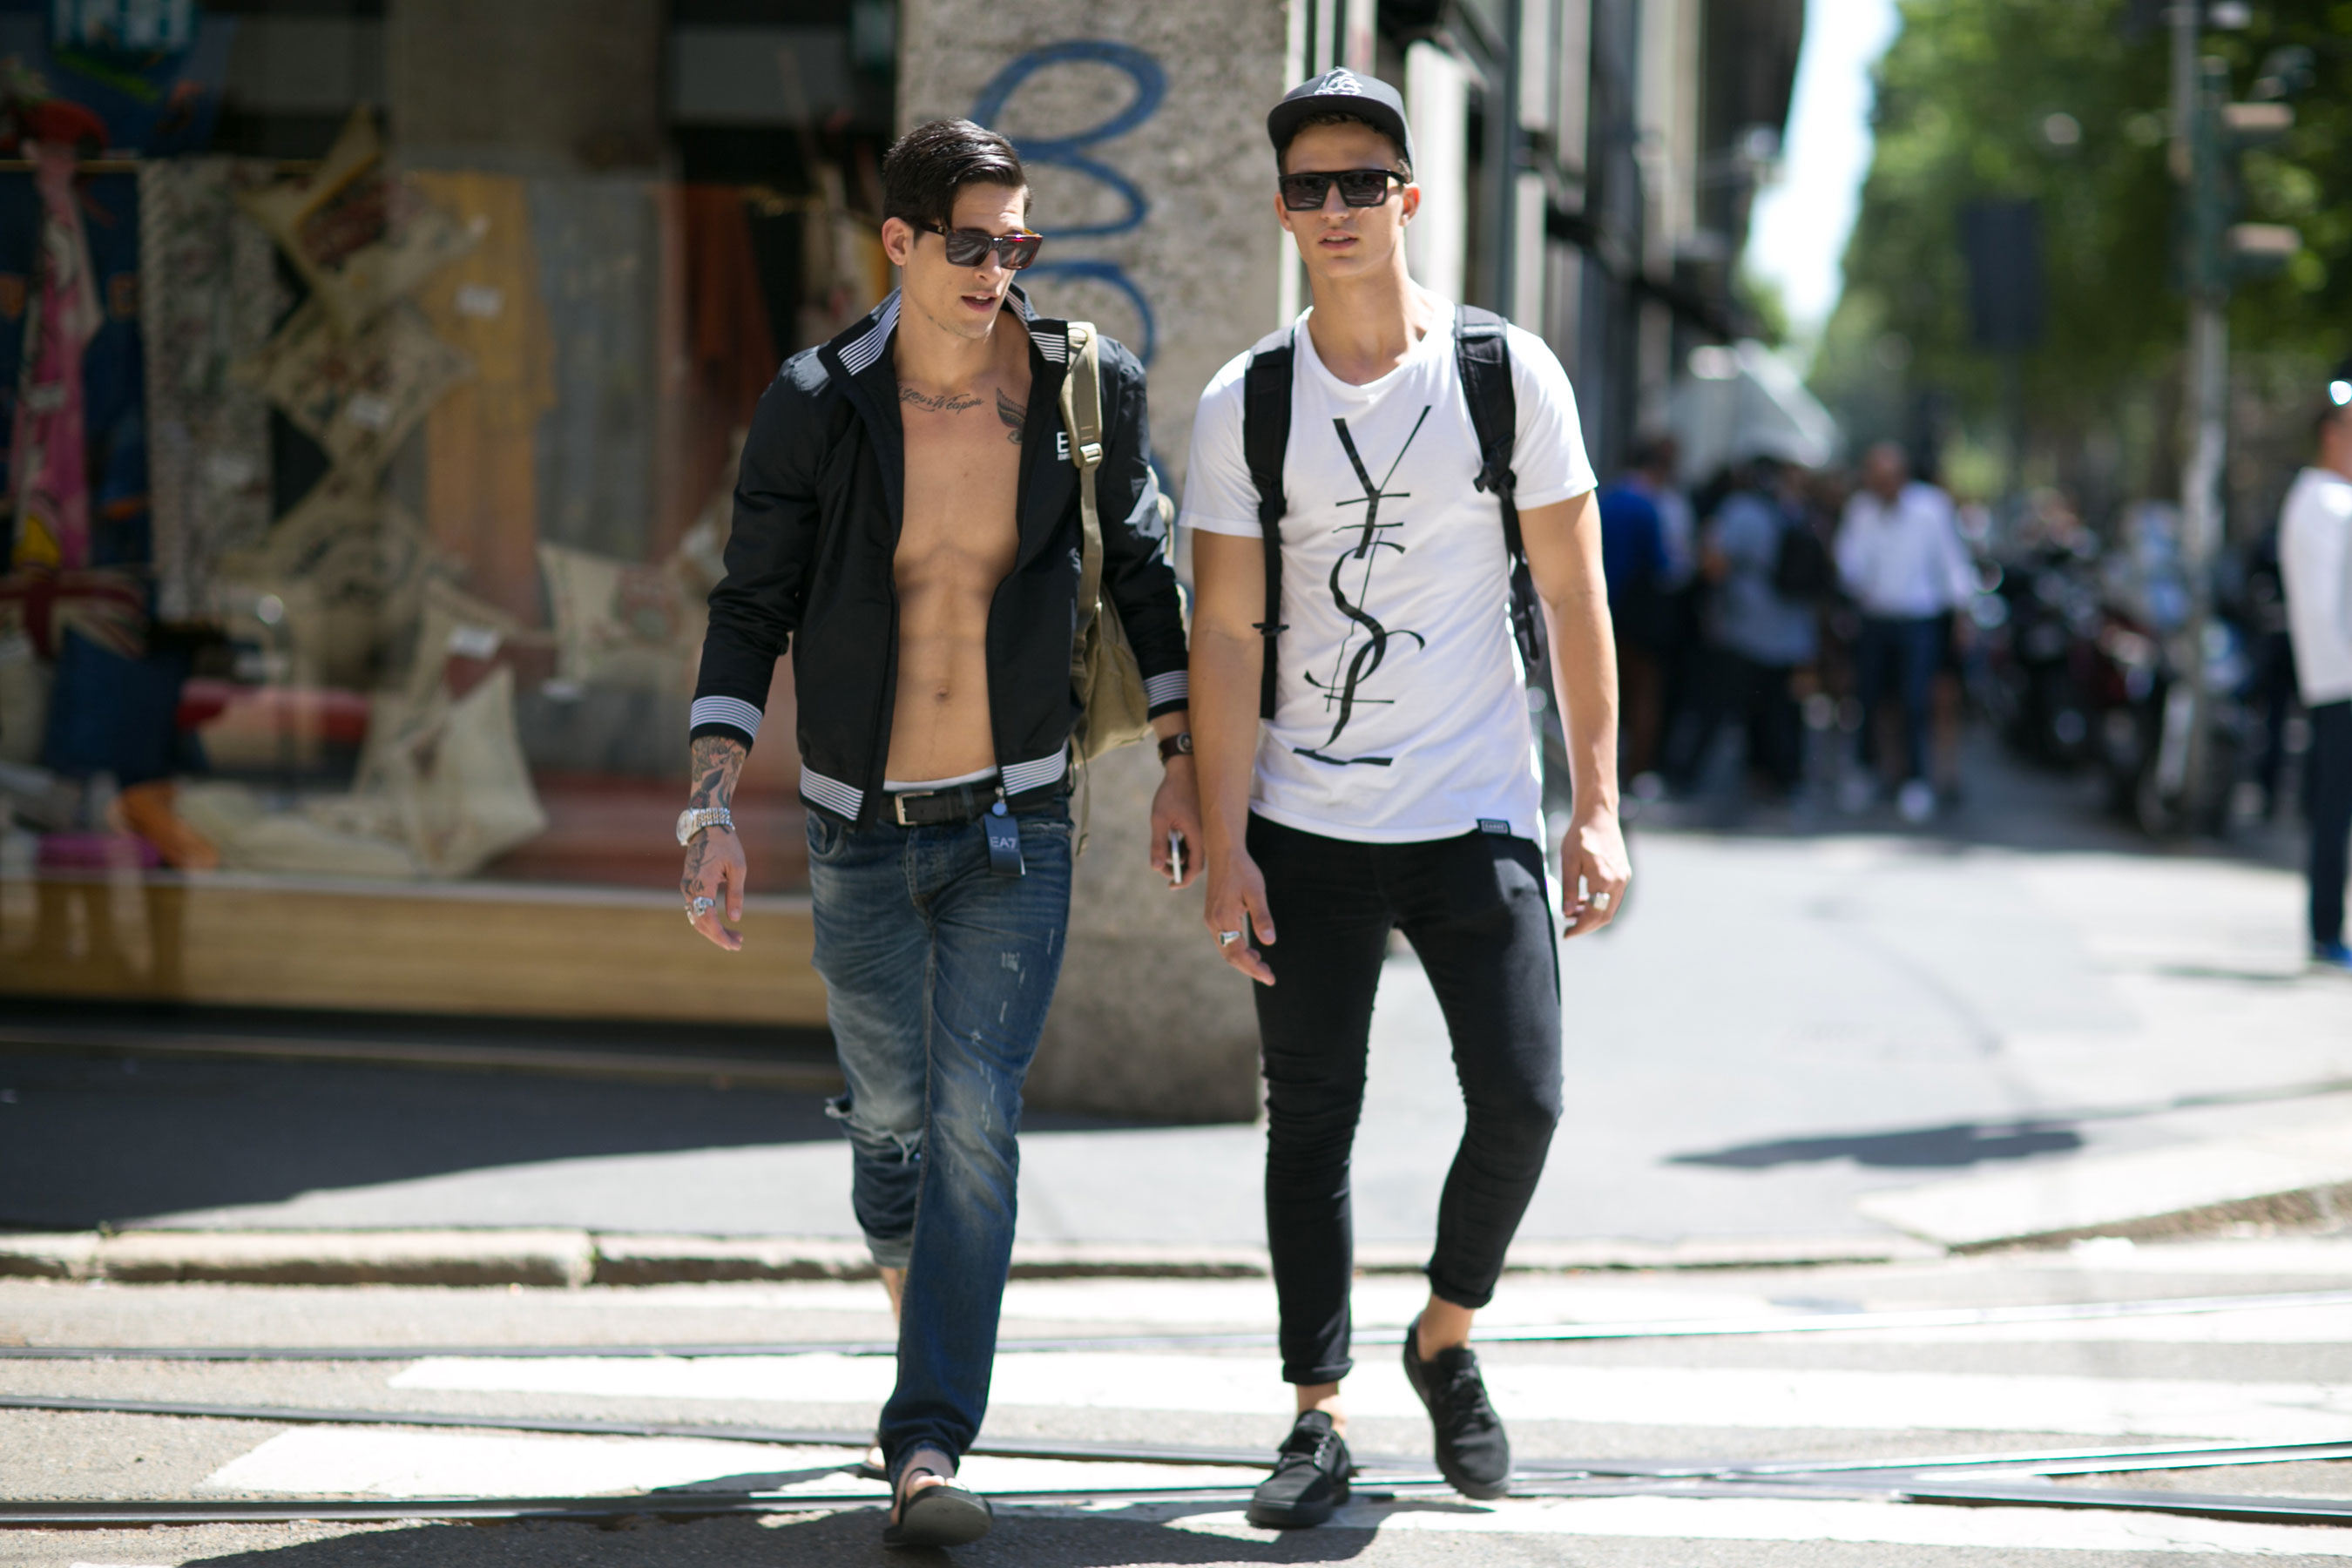 11 Awesome And Stylish Men’s Street Styles